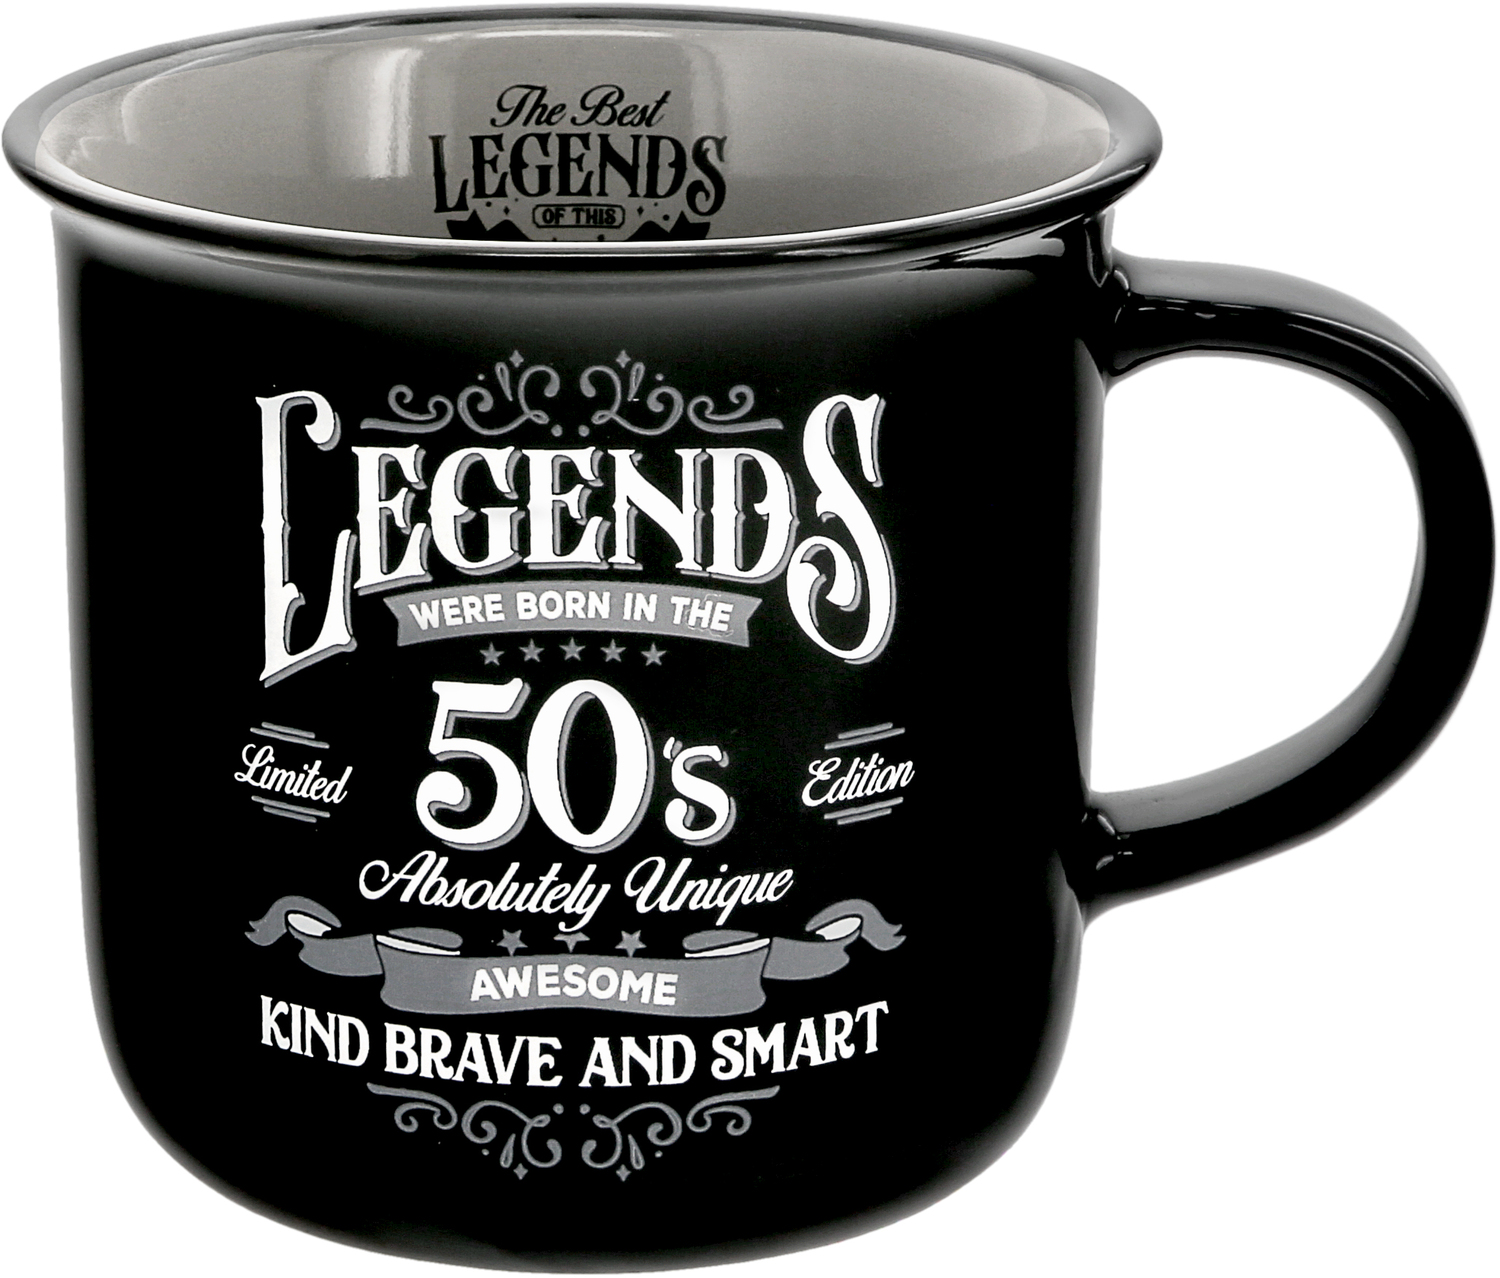 50's by Legends of this World - 50's - 13 oz Mug